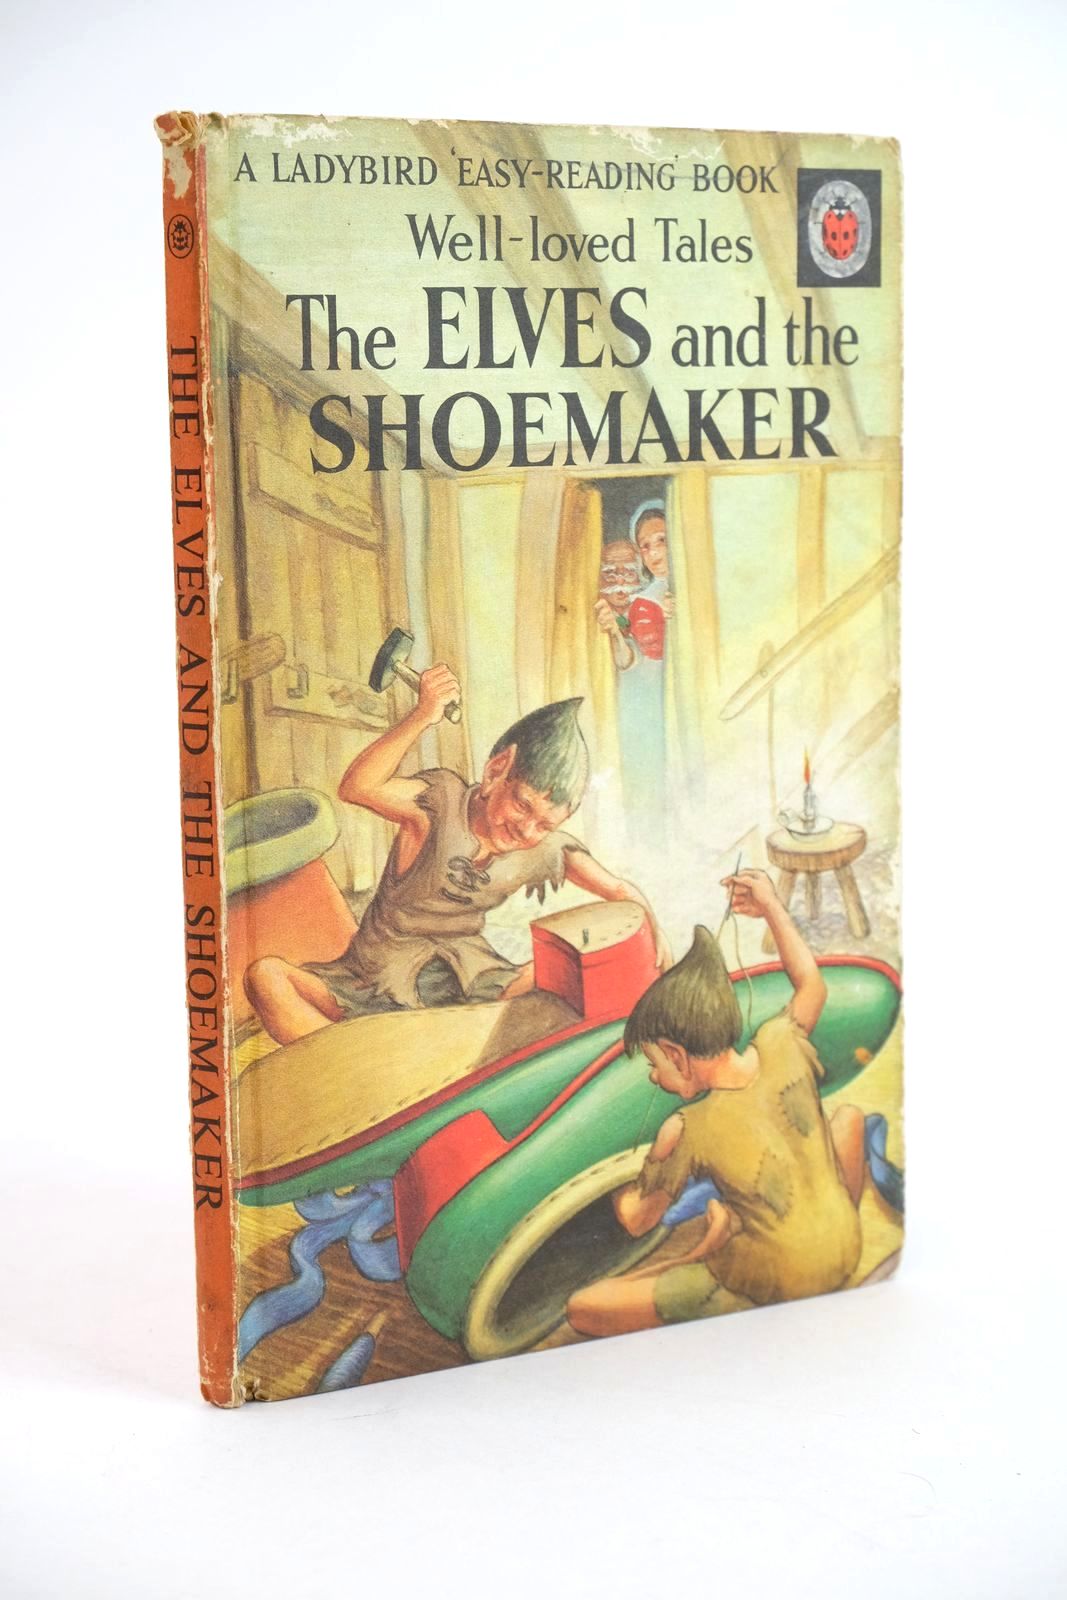 Photo of THE ELVES AND THE SHOEMAKER written by Southgate, Vera illustrated by Lumley, Robert published by Wills & Hepworth Ltd. (STOCK CODE: 1323627)  for sale by Stella & Rose's Books